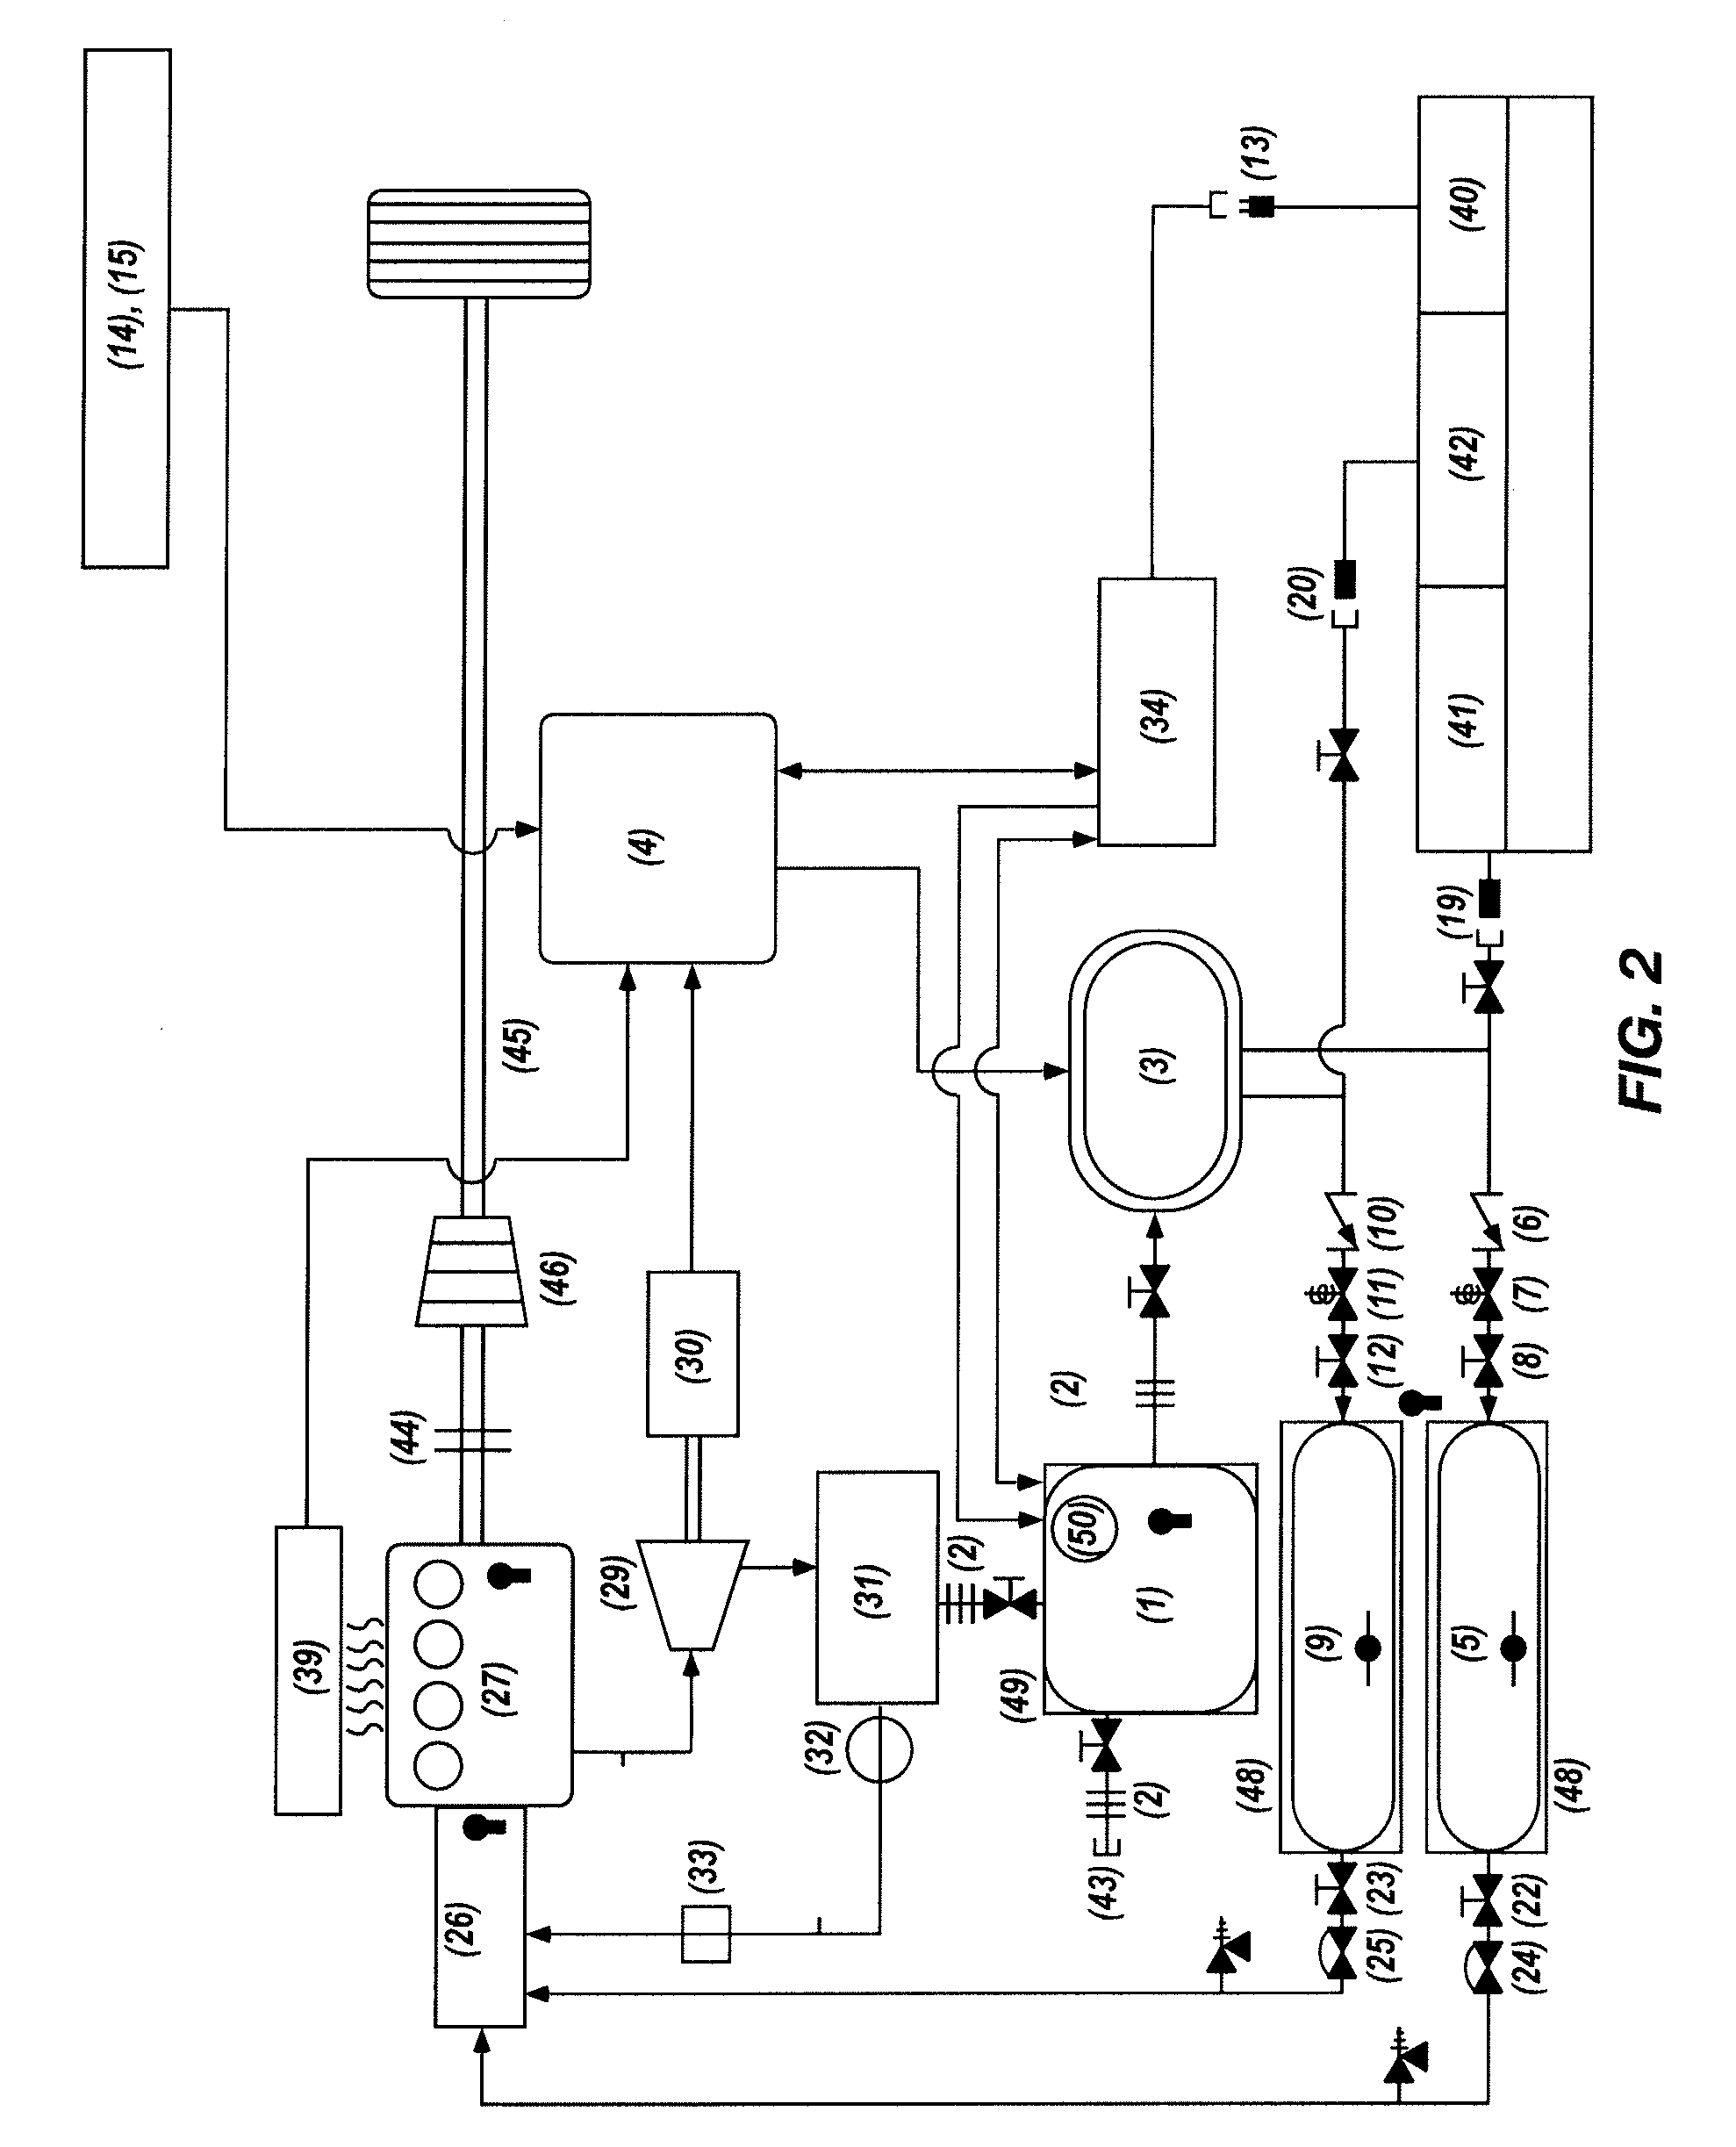 Partially Self-Refueling Low Emissions Vehicle and Stationary Power System